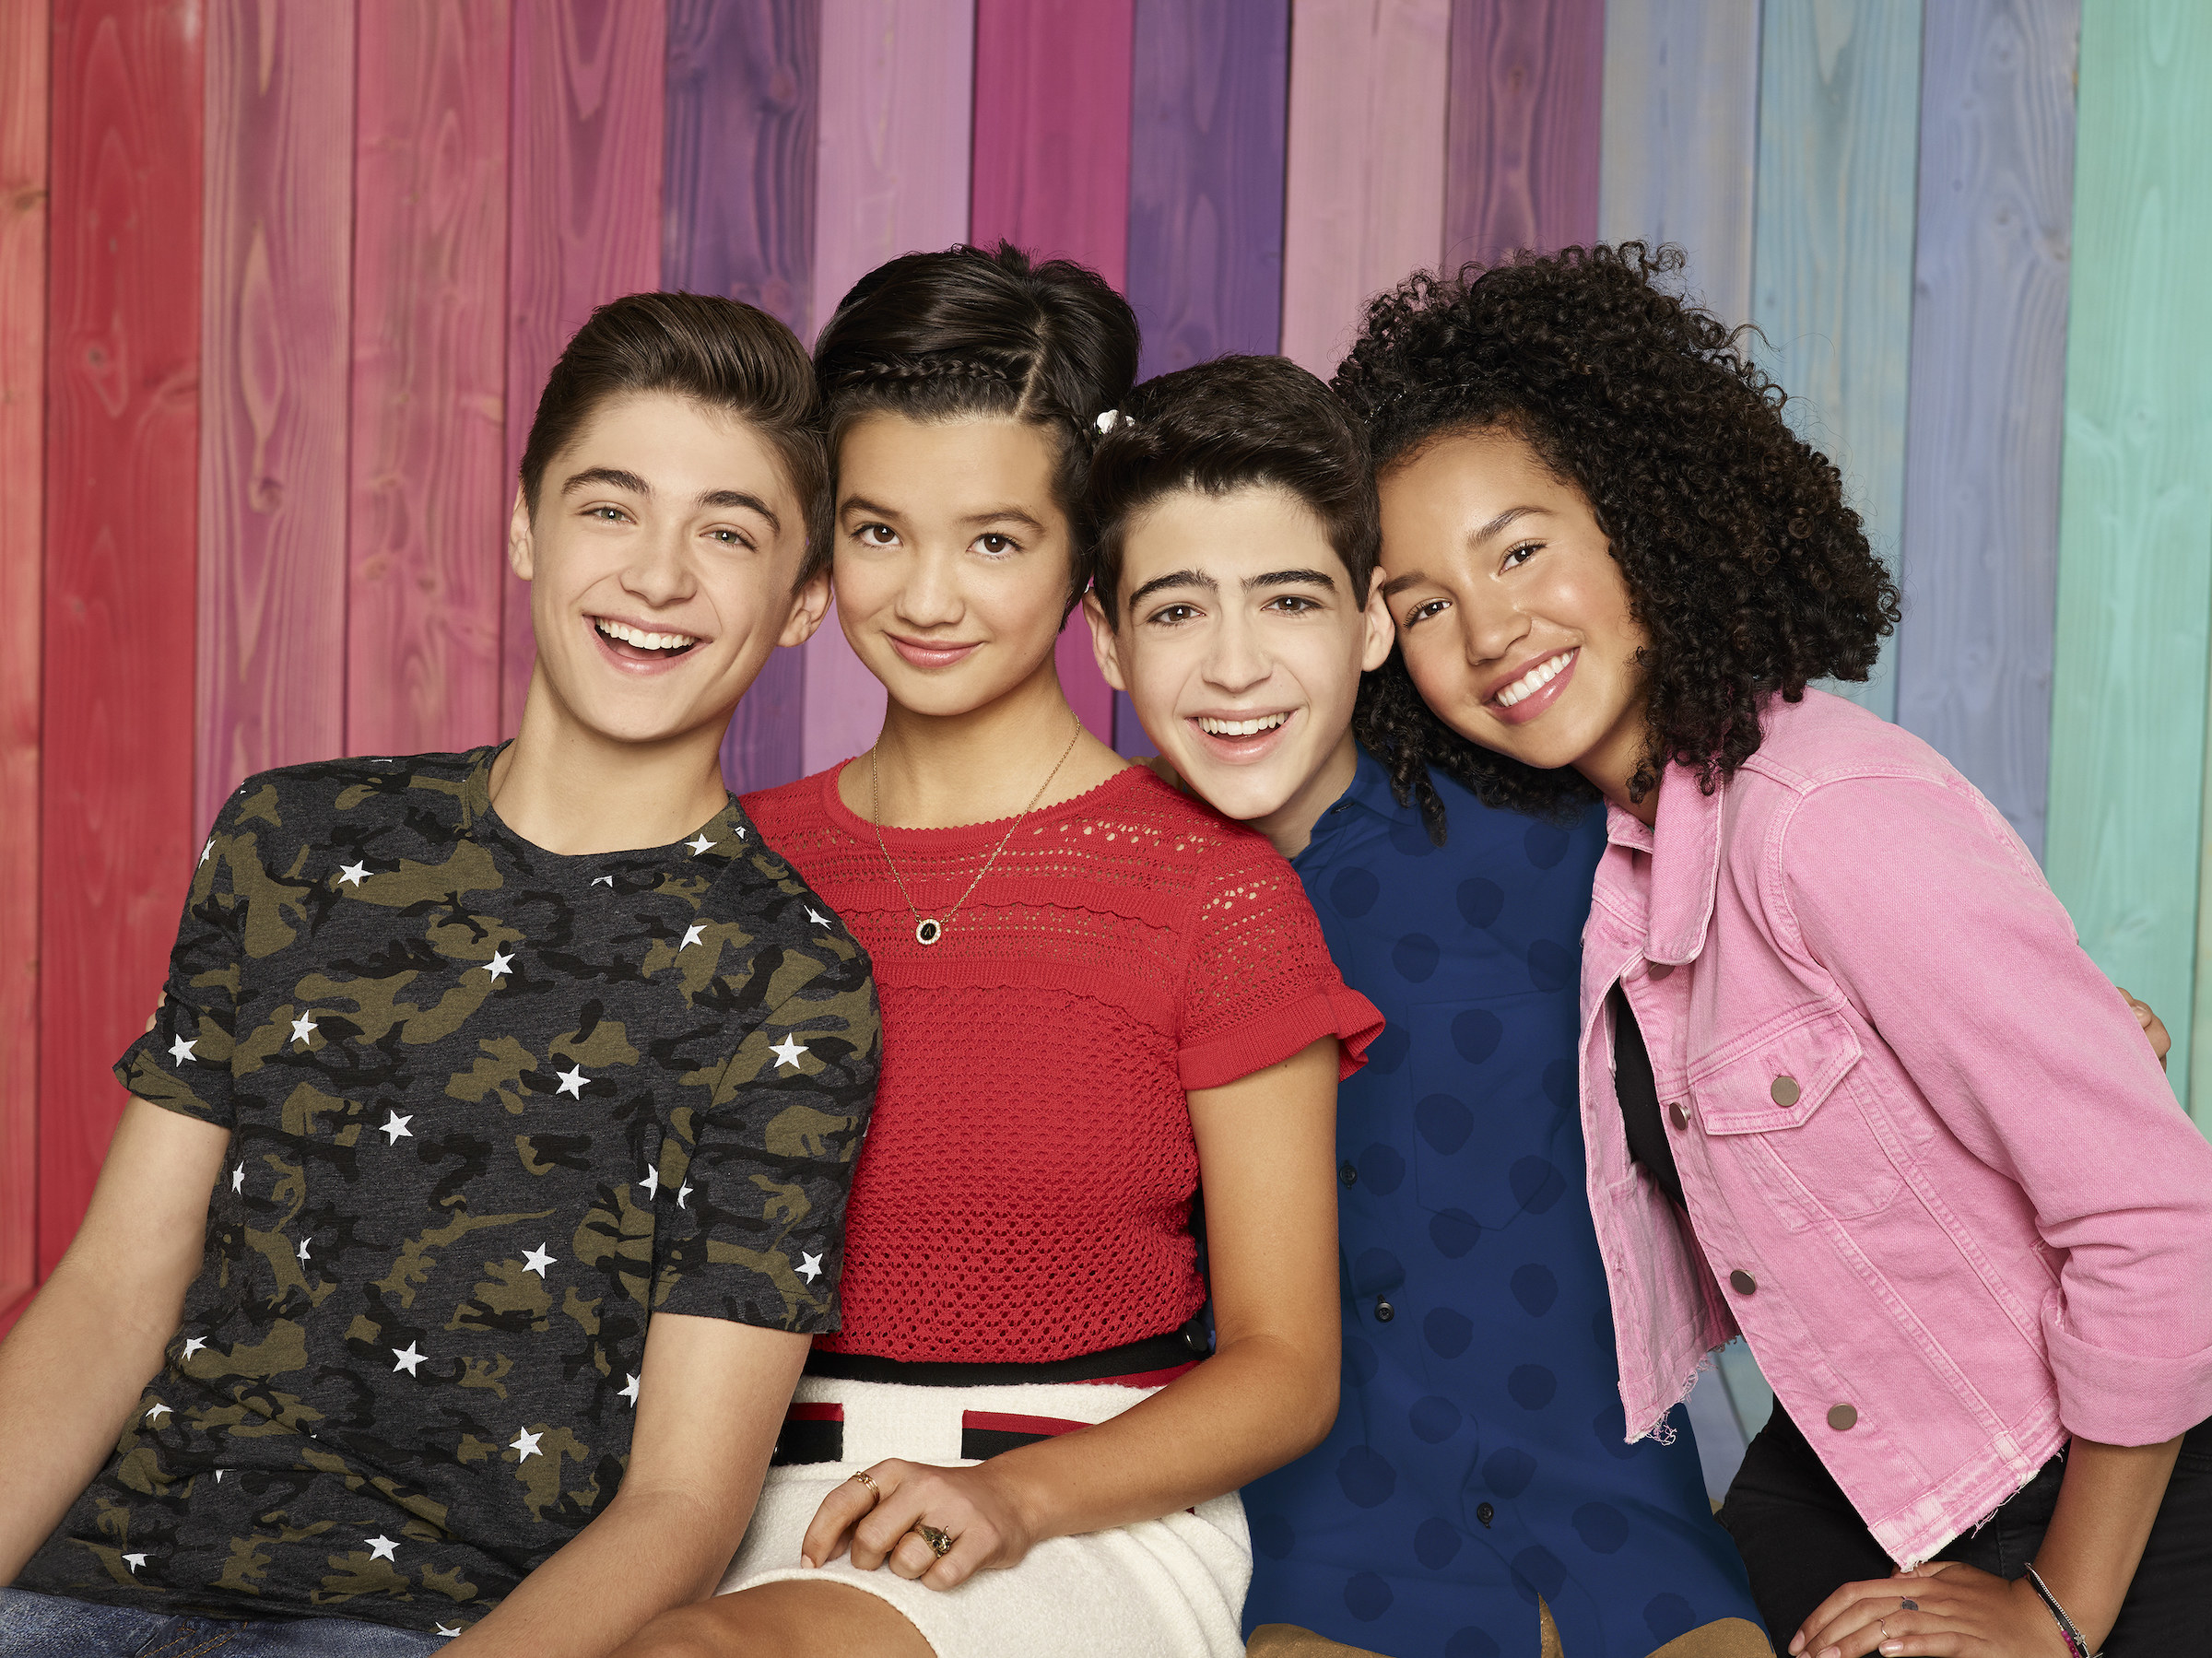 The cast of Andi Mack sit together